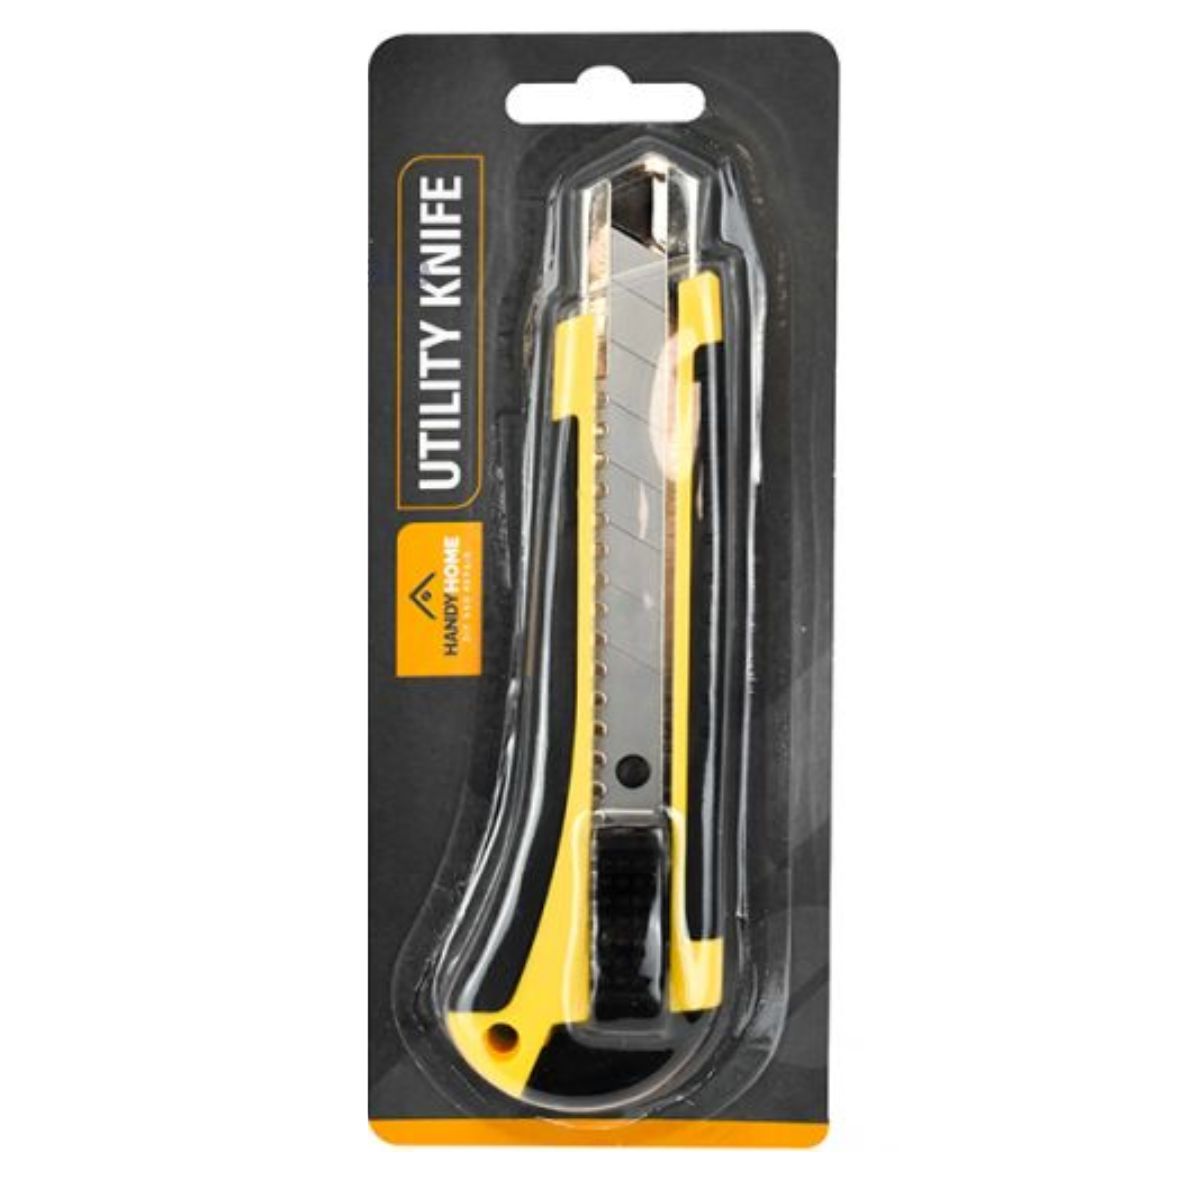 A Handy Home utility knife in a black and yellow packaging, designed for cutting and precision work.